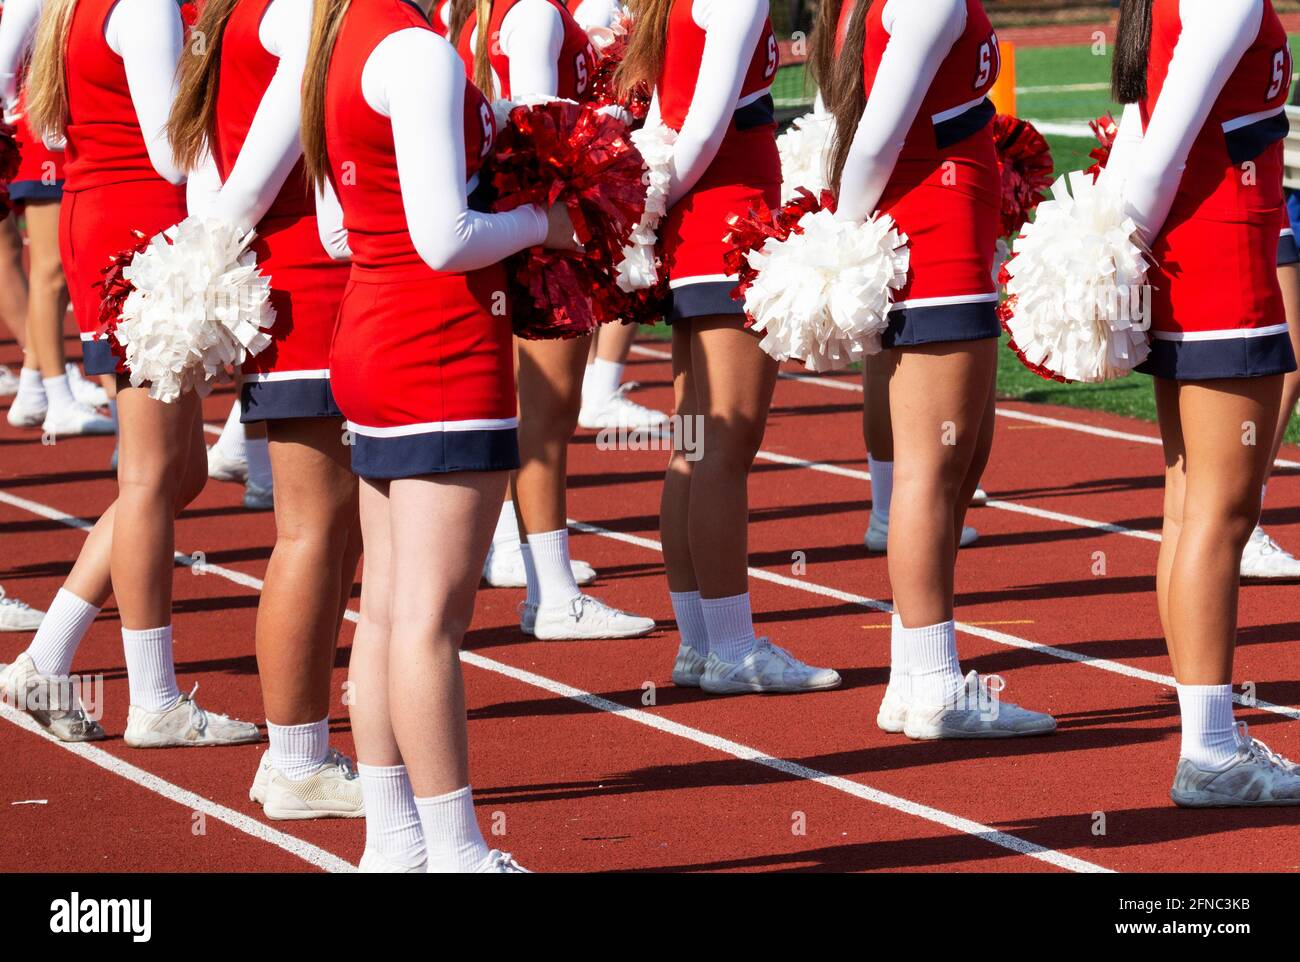 Rear view of high school cheerleaders holding pom poms standing on a red track facing the field during a football game. Stock Photo